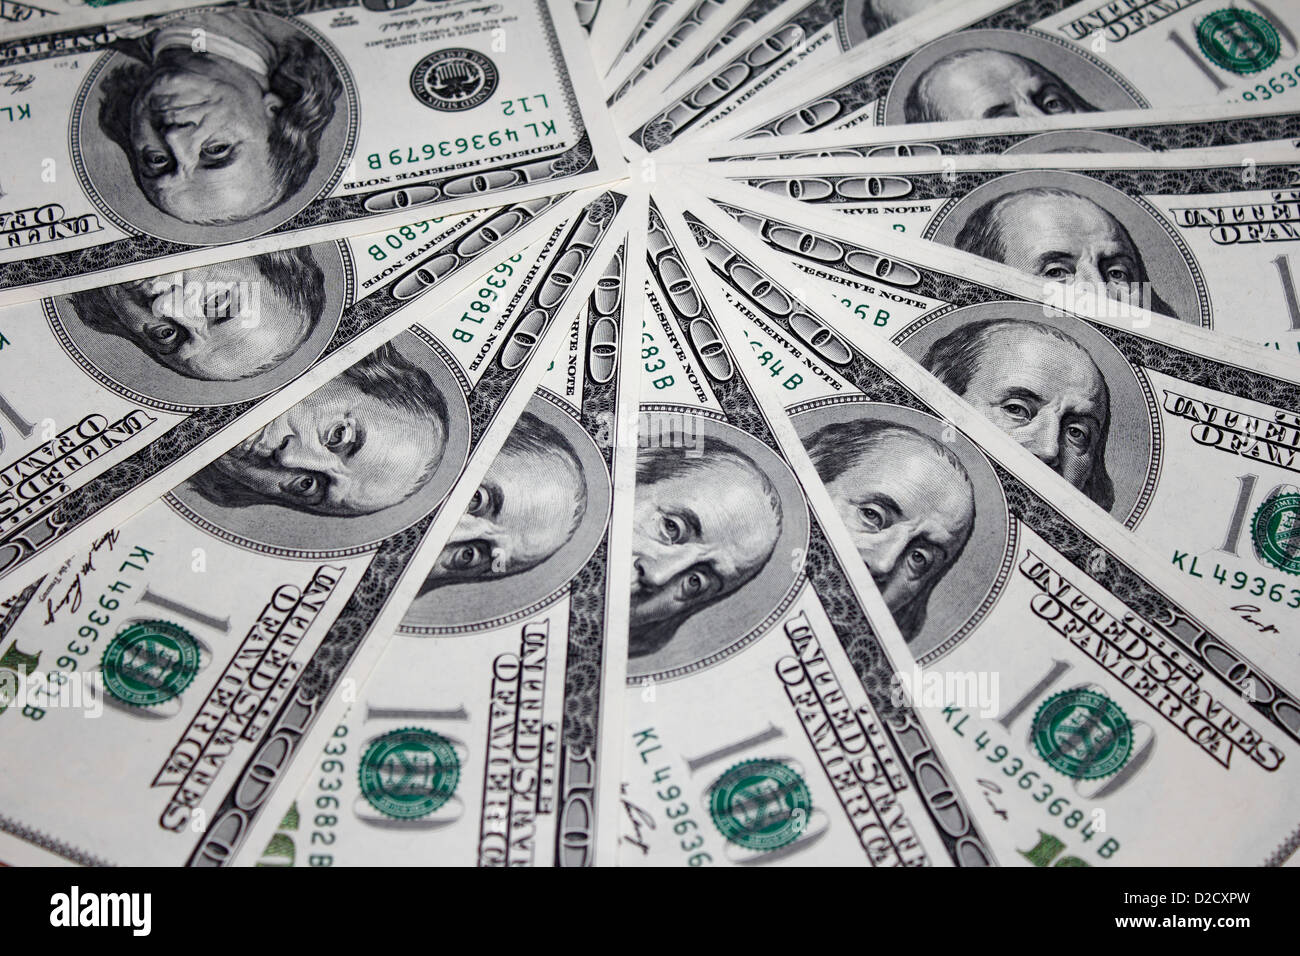 USA $ 100 dollar bills spread in a circle face up Stock Photo